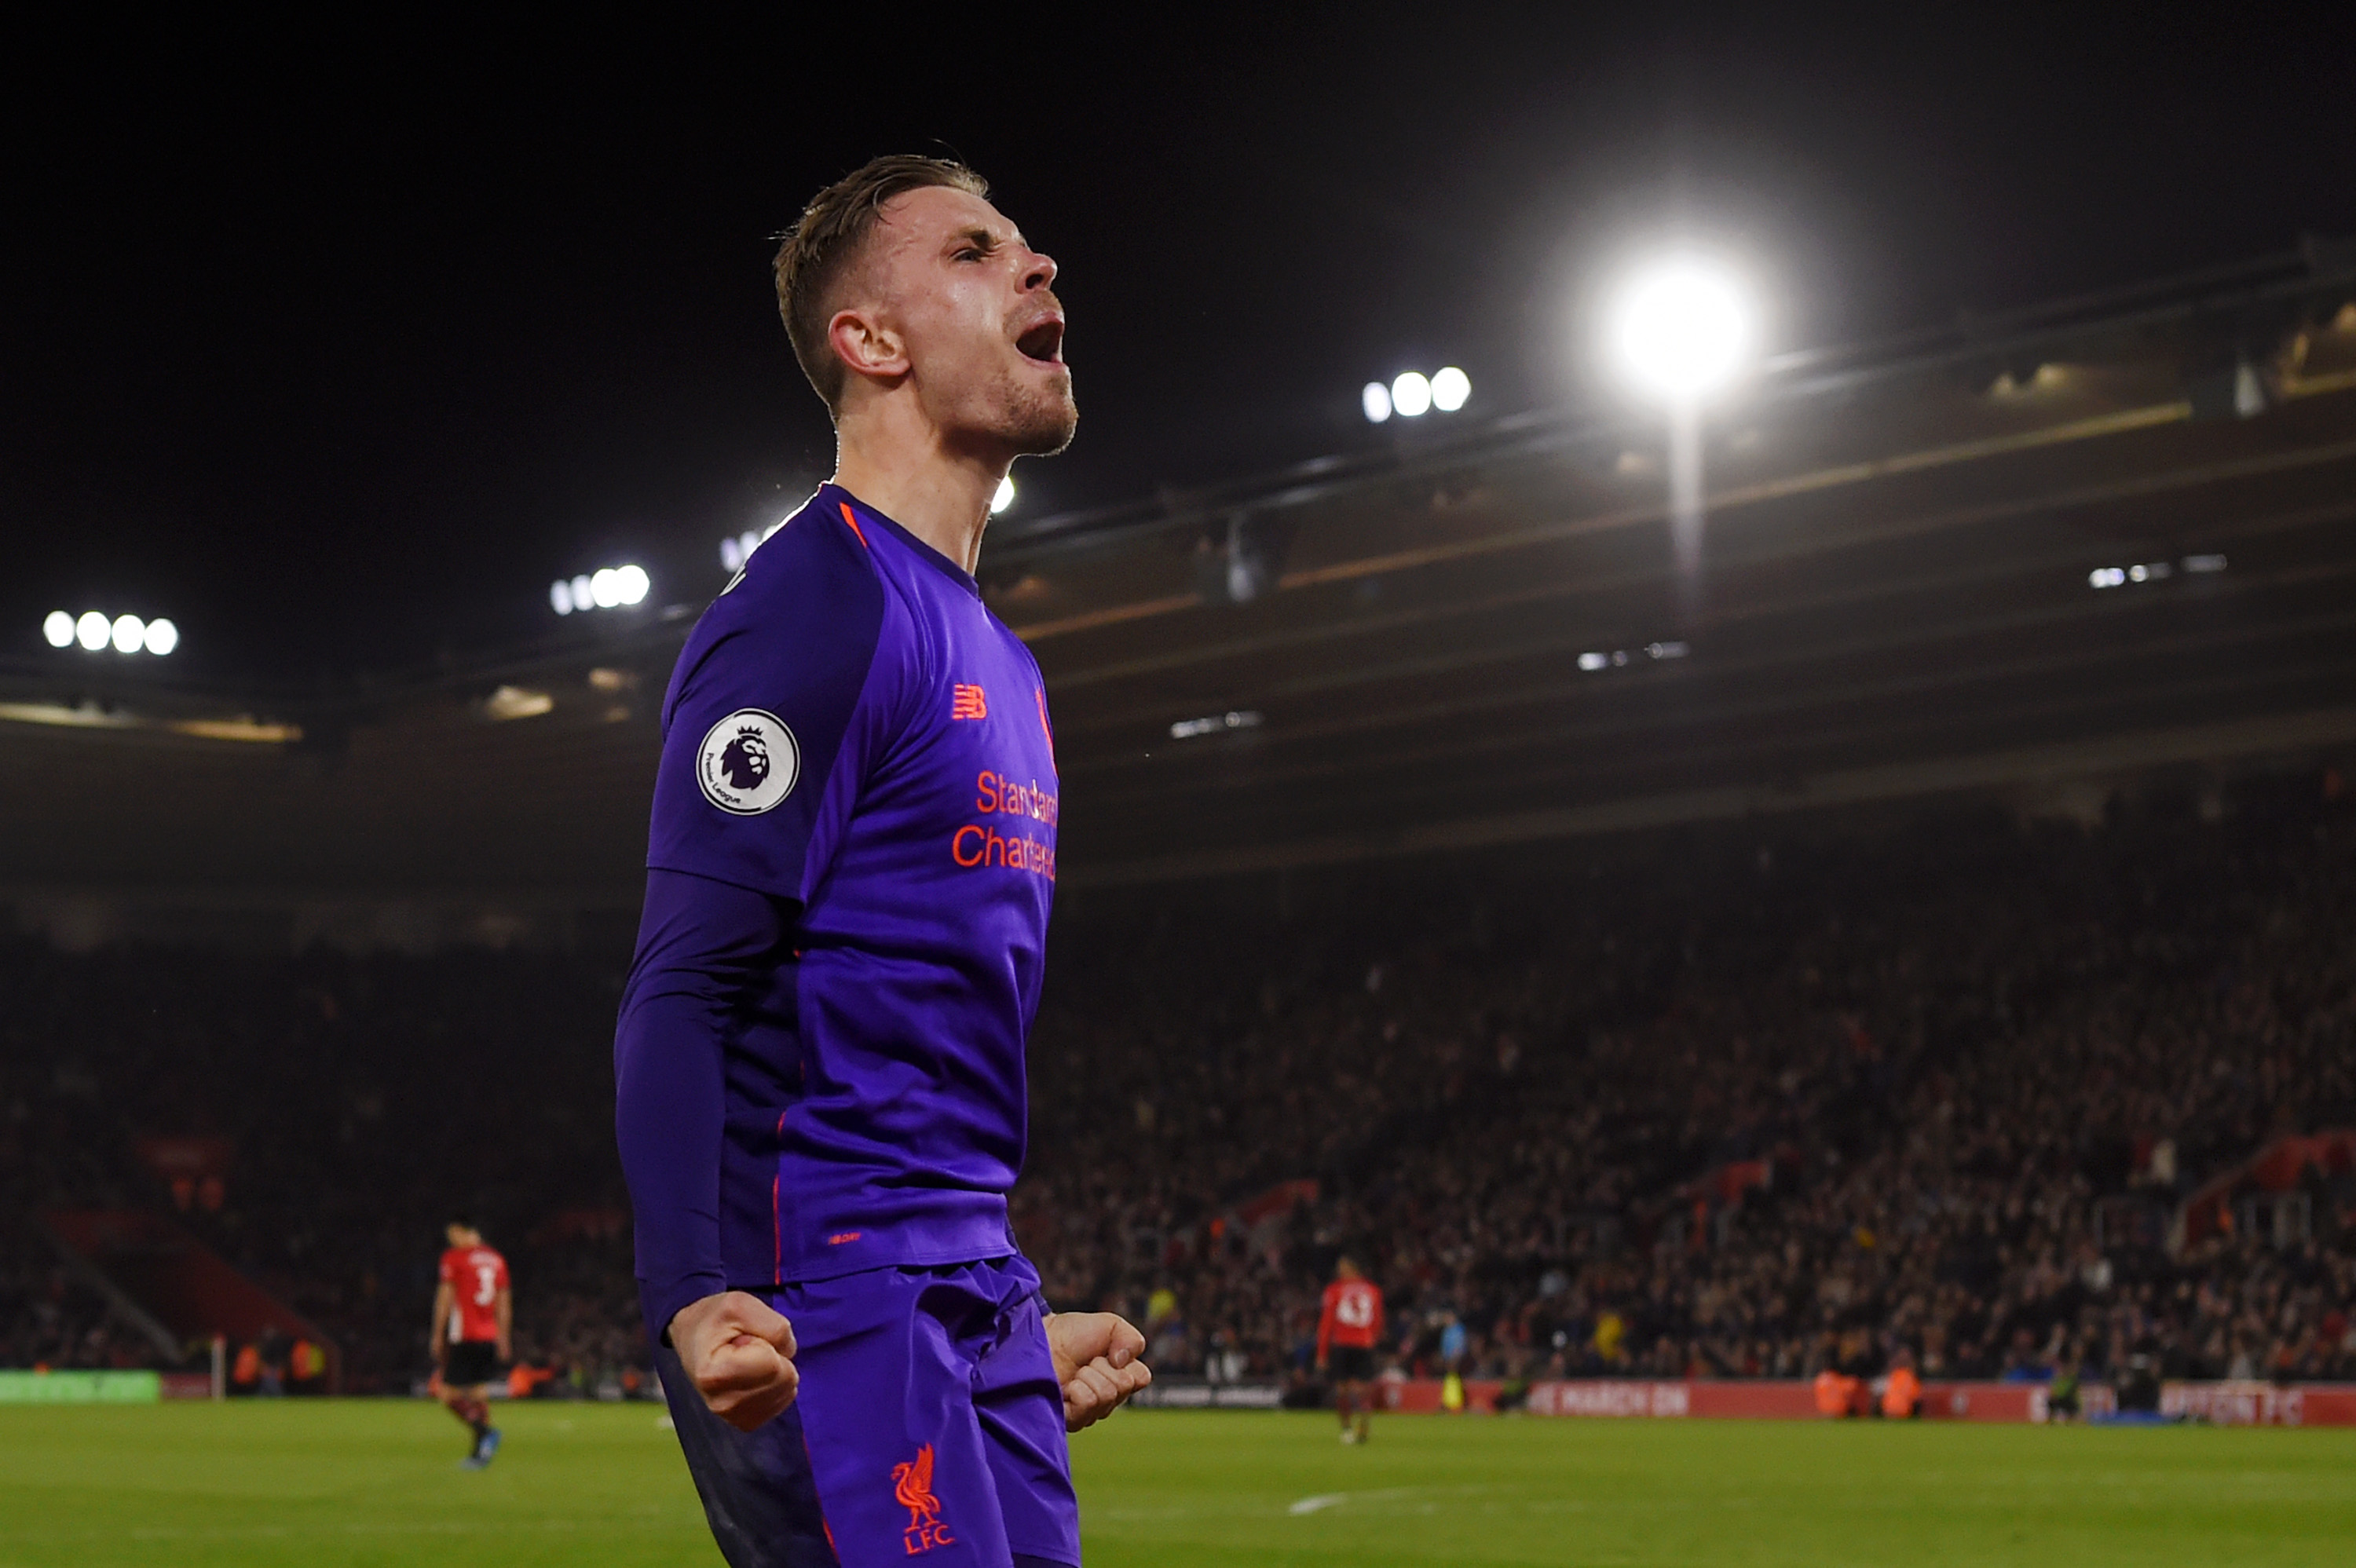 SOUTHAMPTON, ENGLAND - APRIL 05: Jordan Henderson of Liverpool celebrates after scoring his team's third goal during the Premier League match between Southampton FC and Liverpool FC at St Mary's Stadium on April 05, 2019 in Southampton, United Kingdom. (Photo by Mike Hewitt/Getty Images)